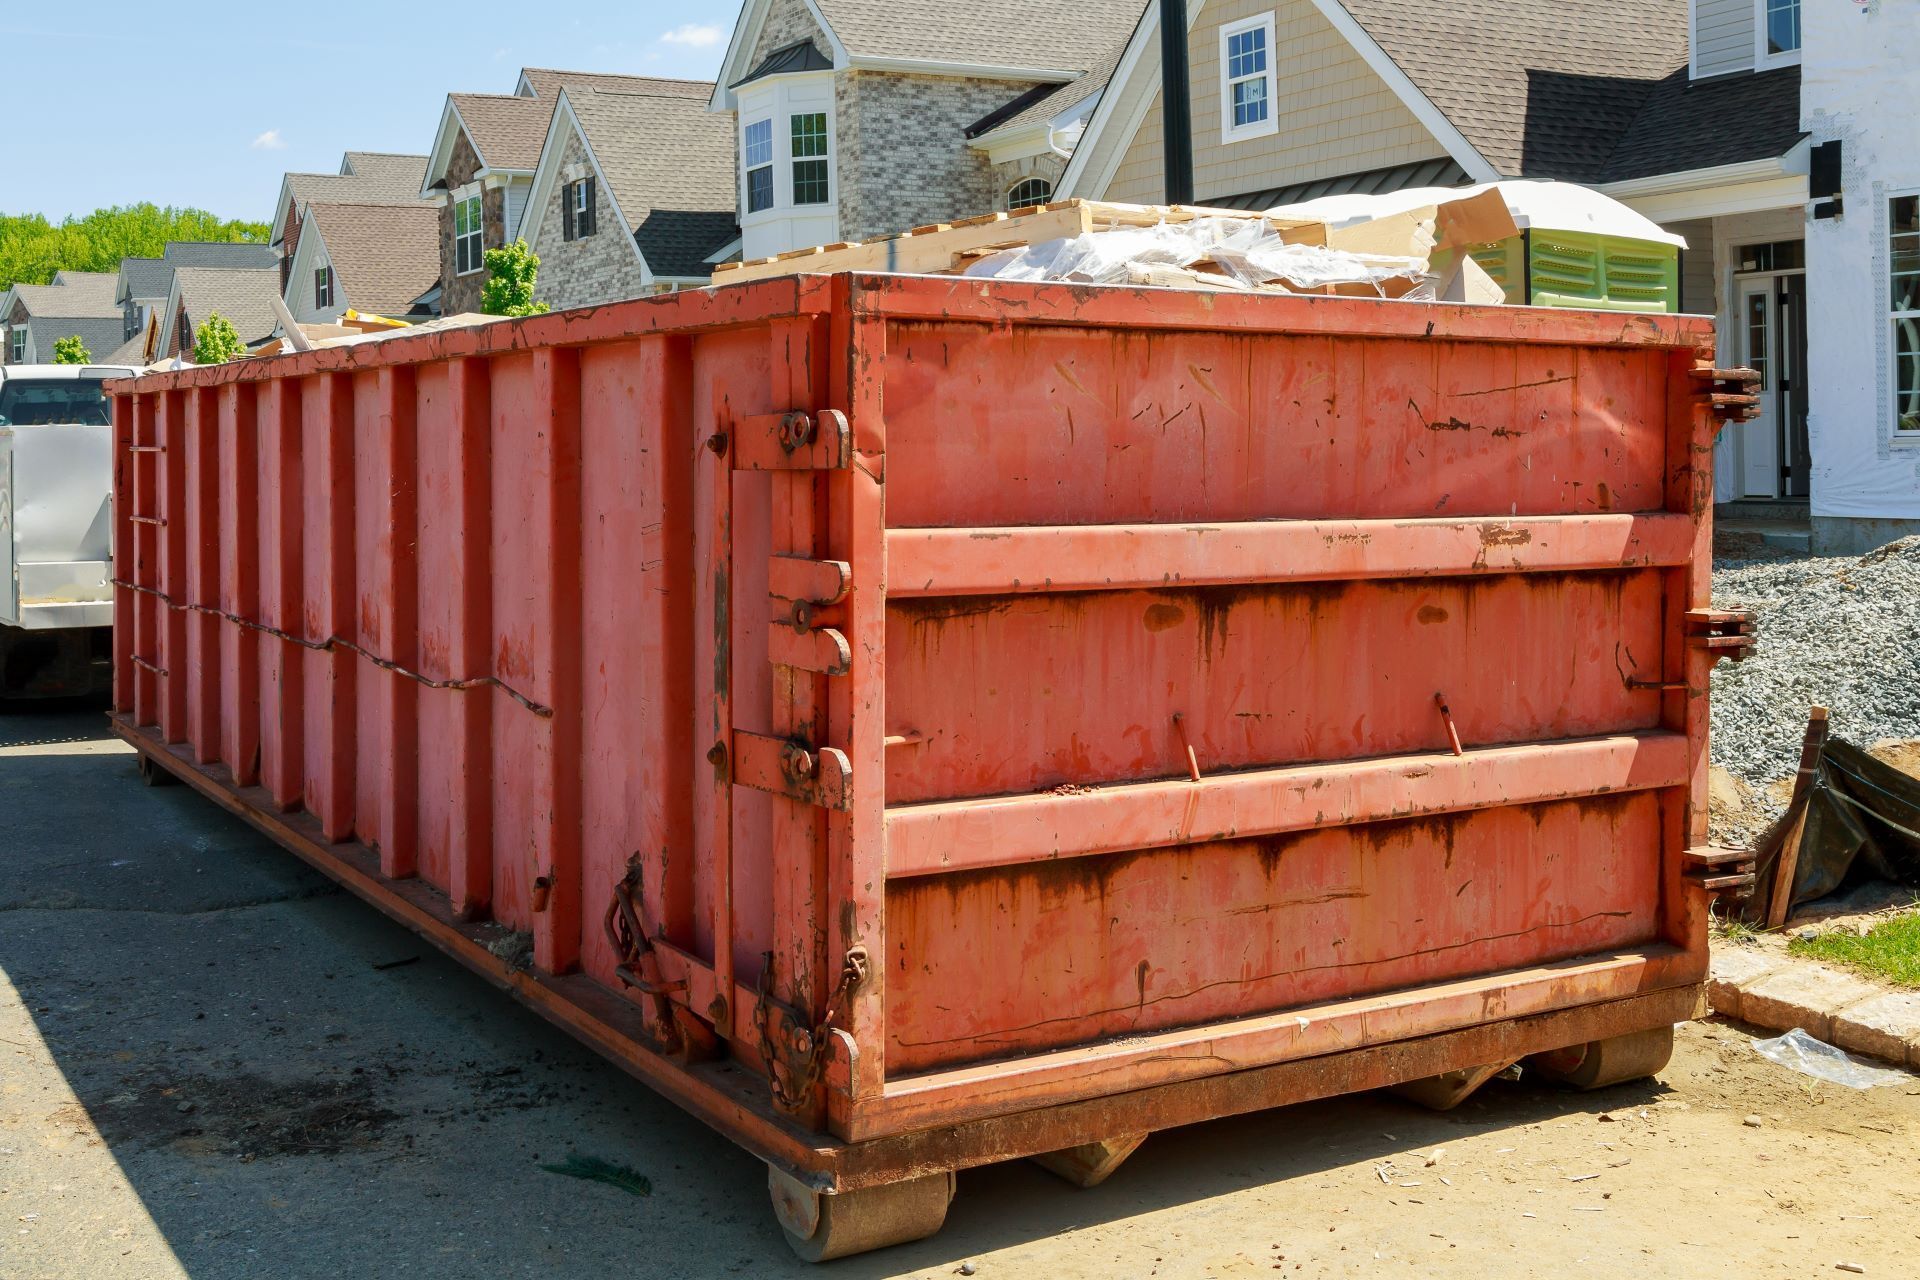 A large red dumpster is parked in front of a house.